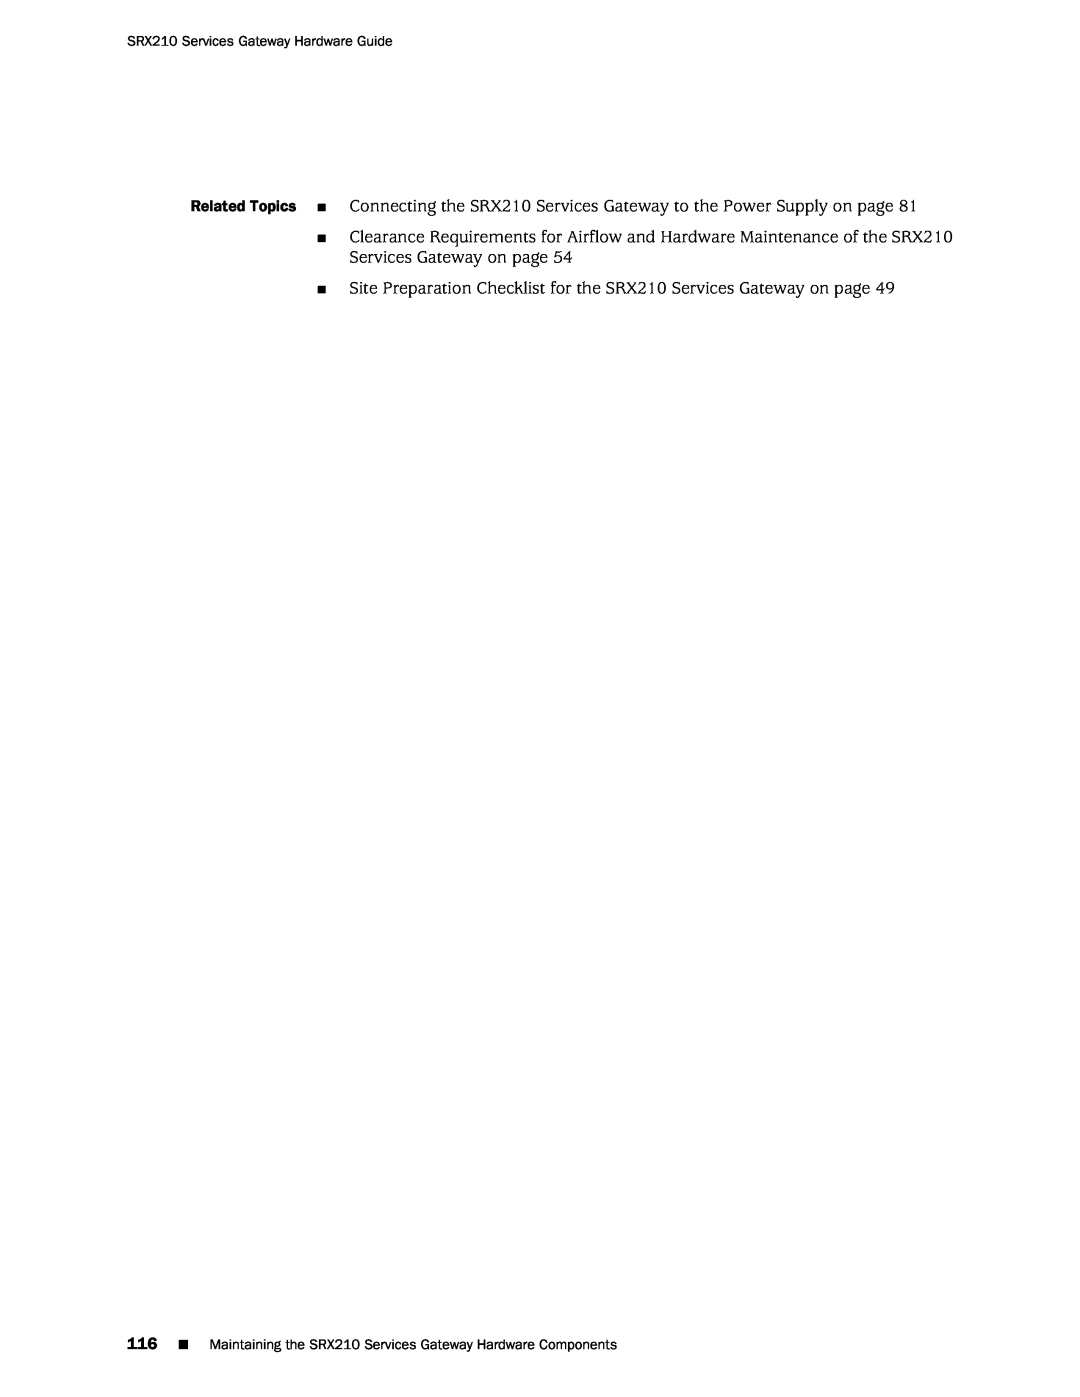 Juniper Networks SRX 210 manual Site Preparation Checklist for the SRX210 Services Gateway on page 